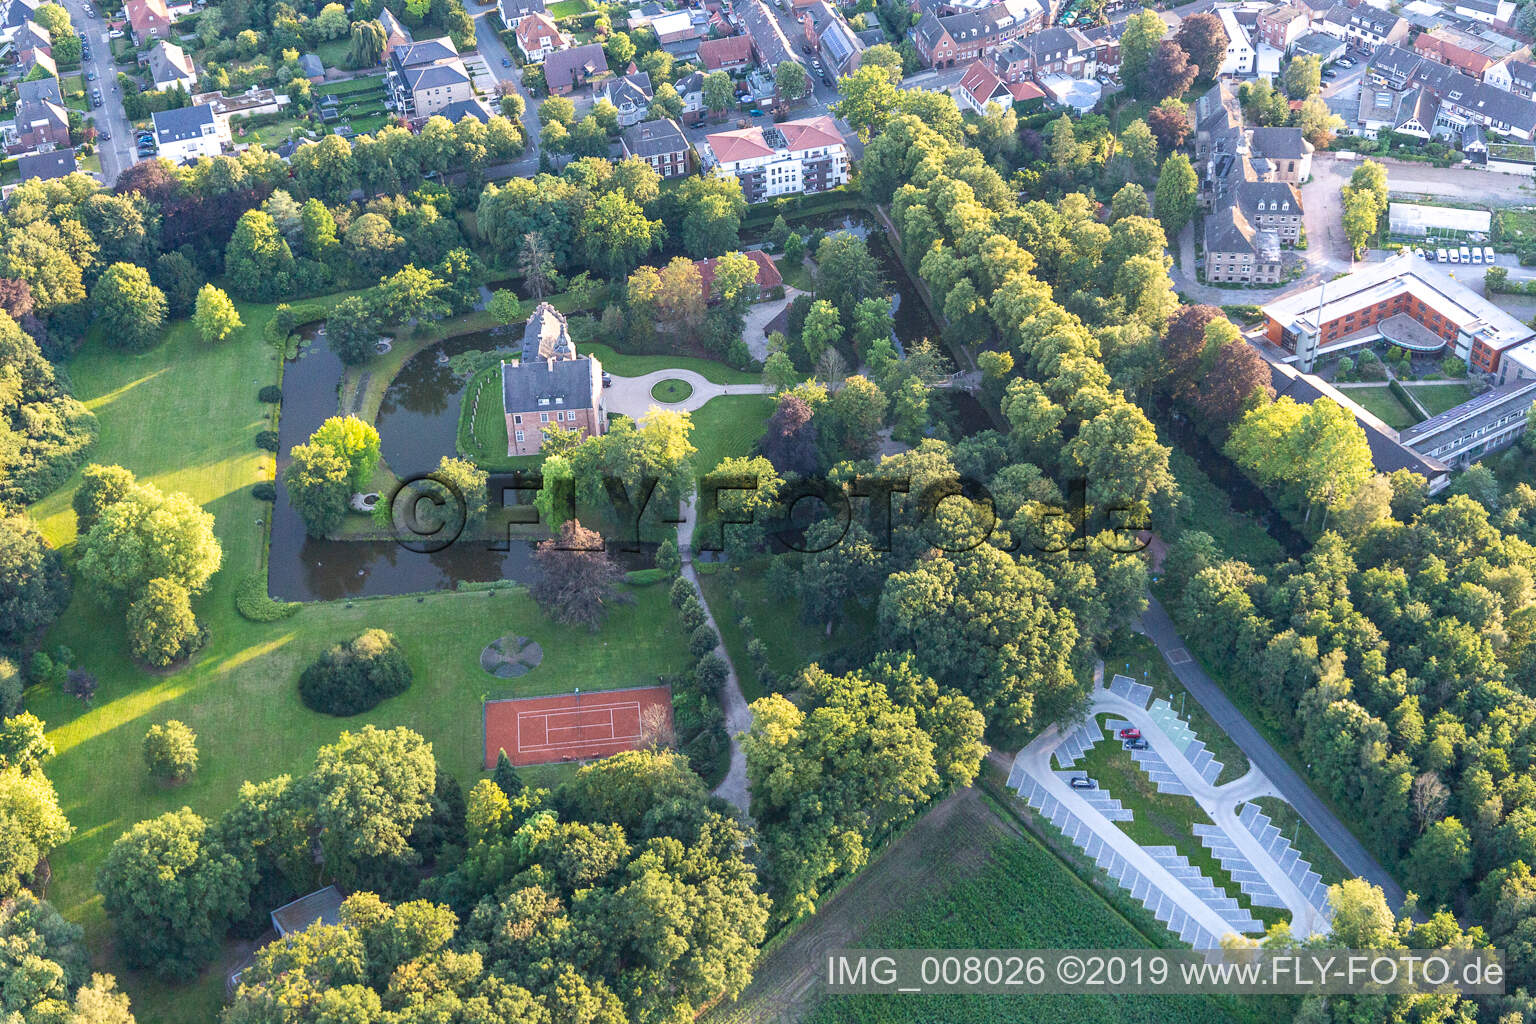 Aerial photograpy of Princely Salm-Salm administration in Rhede in the state North Rhine-Westphalia, Germany